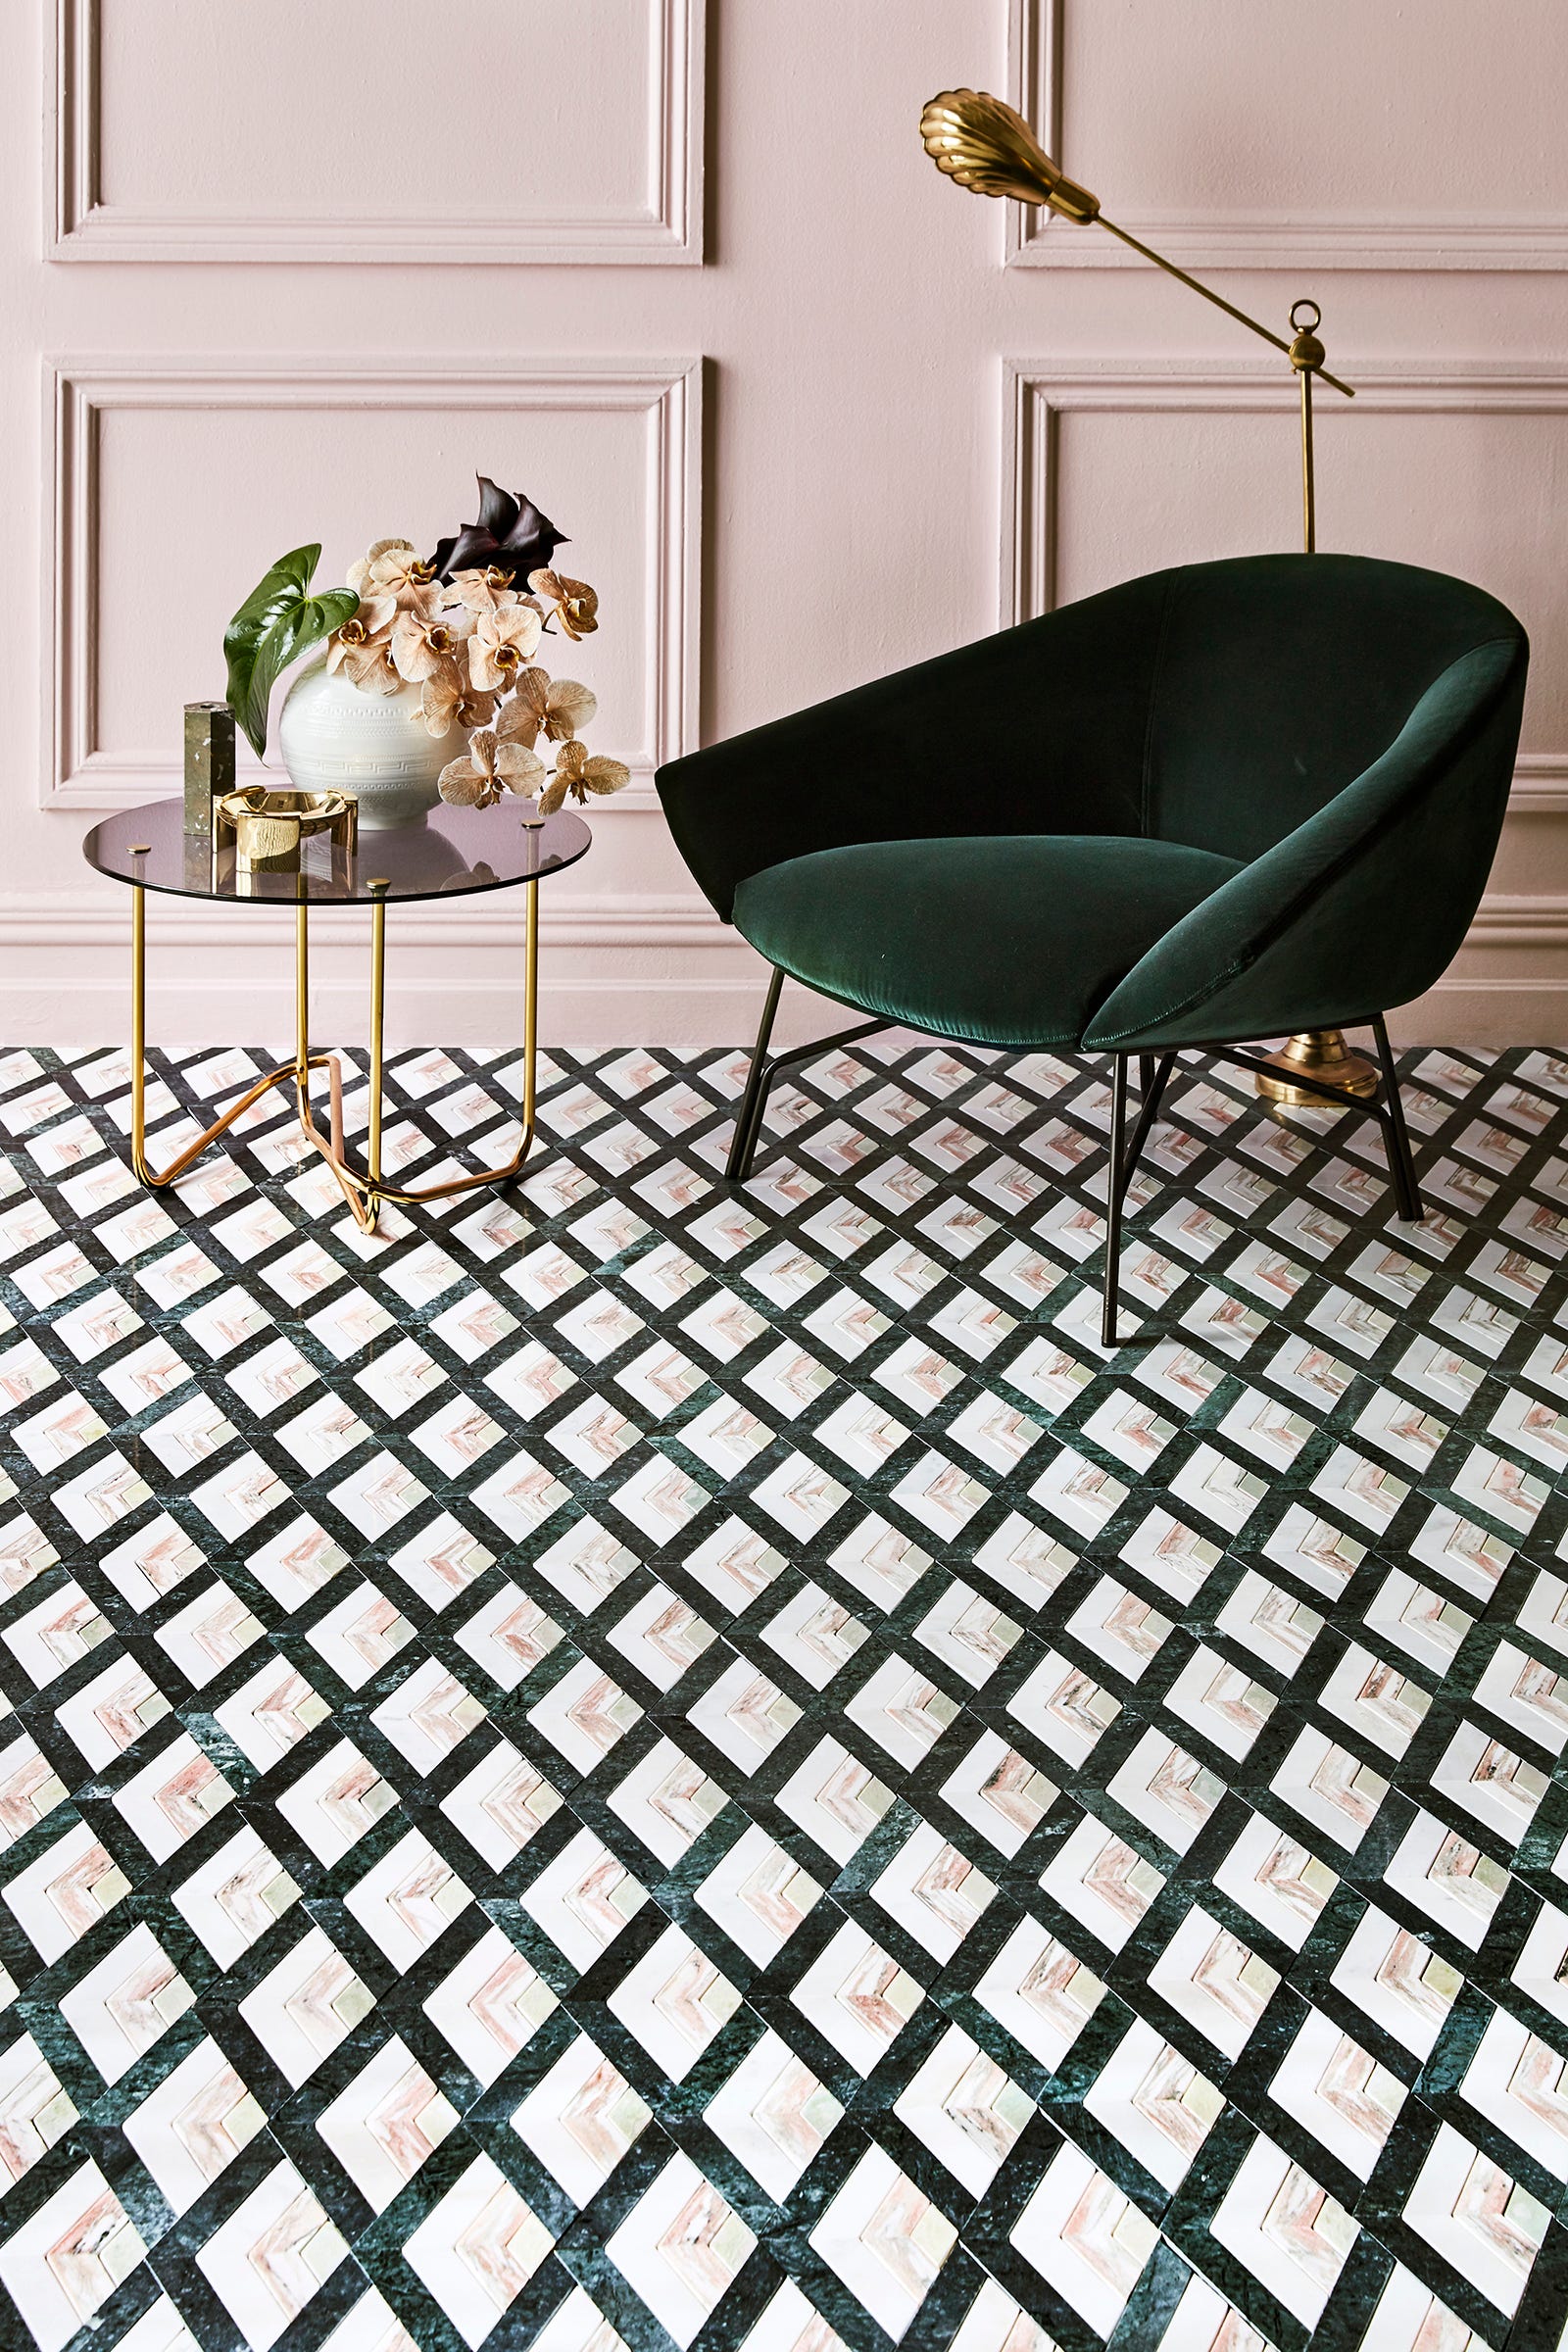 The diagonal pattern created by Natale's graphic Moscow honed marble tiles in Norwegian rose, Carrara Gioia and emerald green creates a dynamic ground for classic paneled walls, painted in a soft blush.